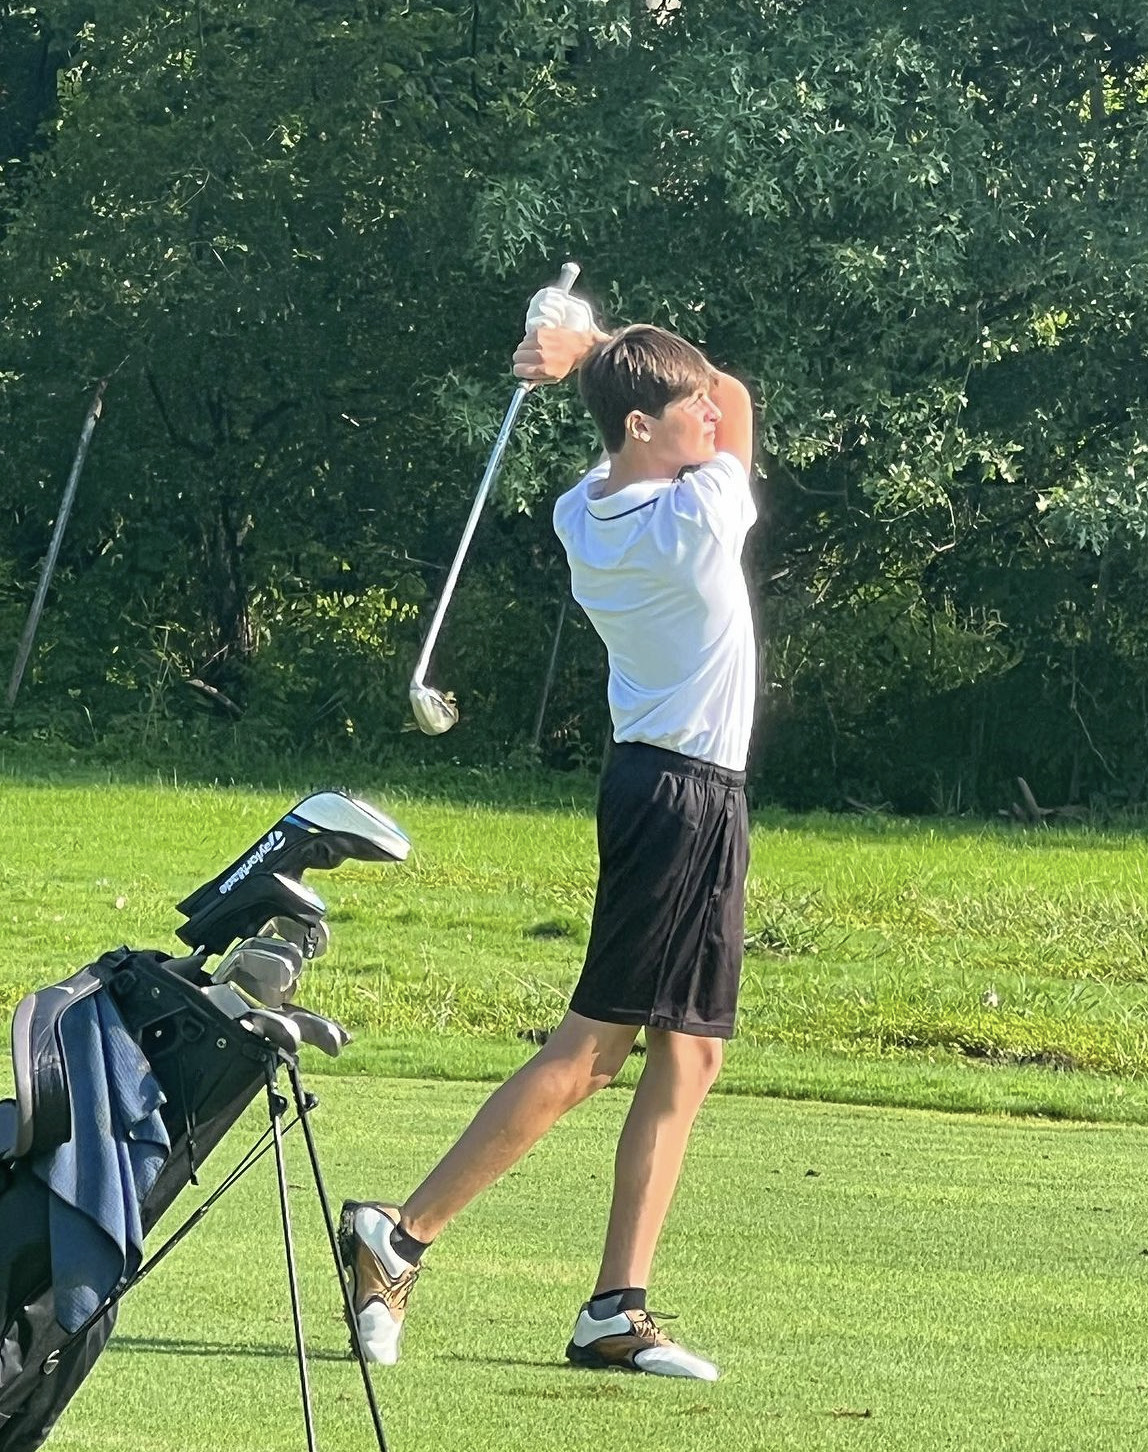 Co-Captain Gavi Lappen cut his score from 85 last year to 80 this season. 